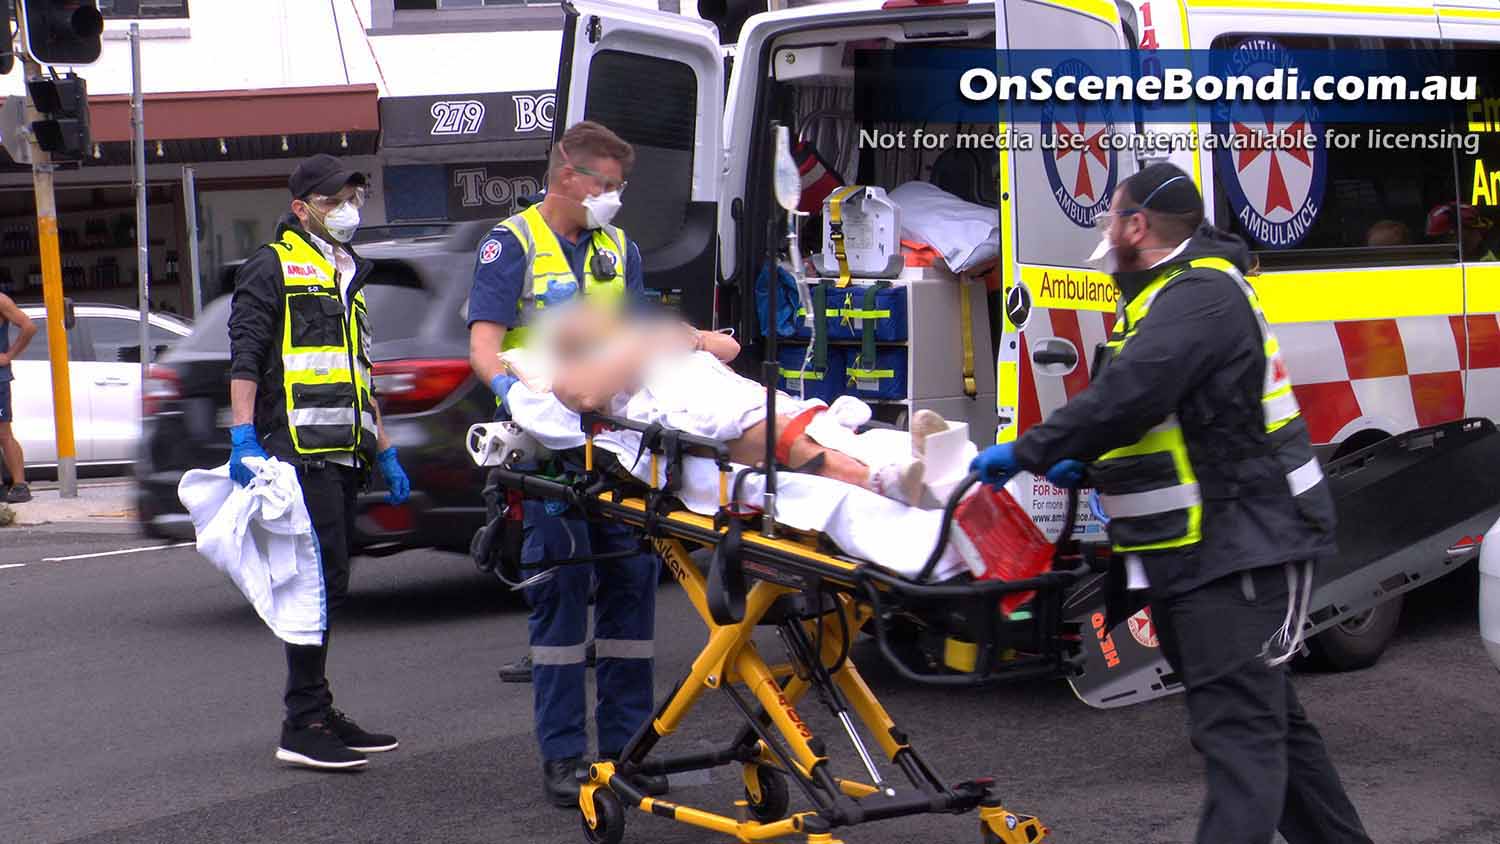 Scooter rider in serious condition following crash in Bondi